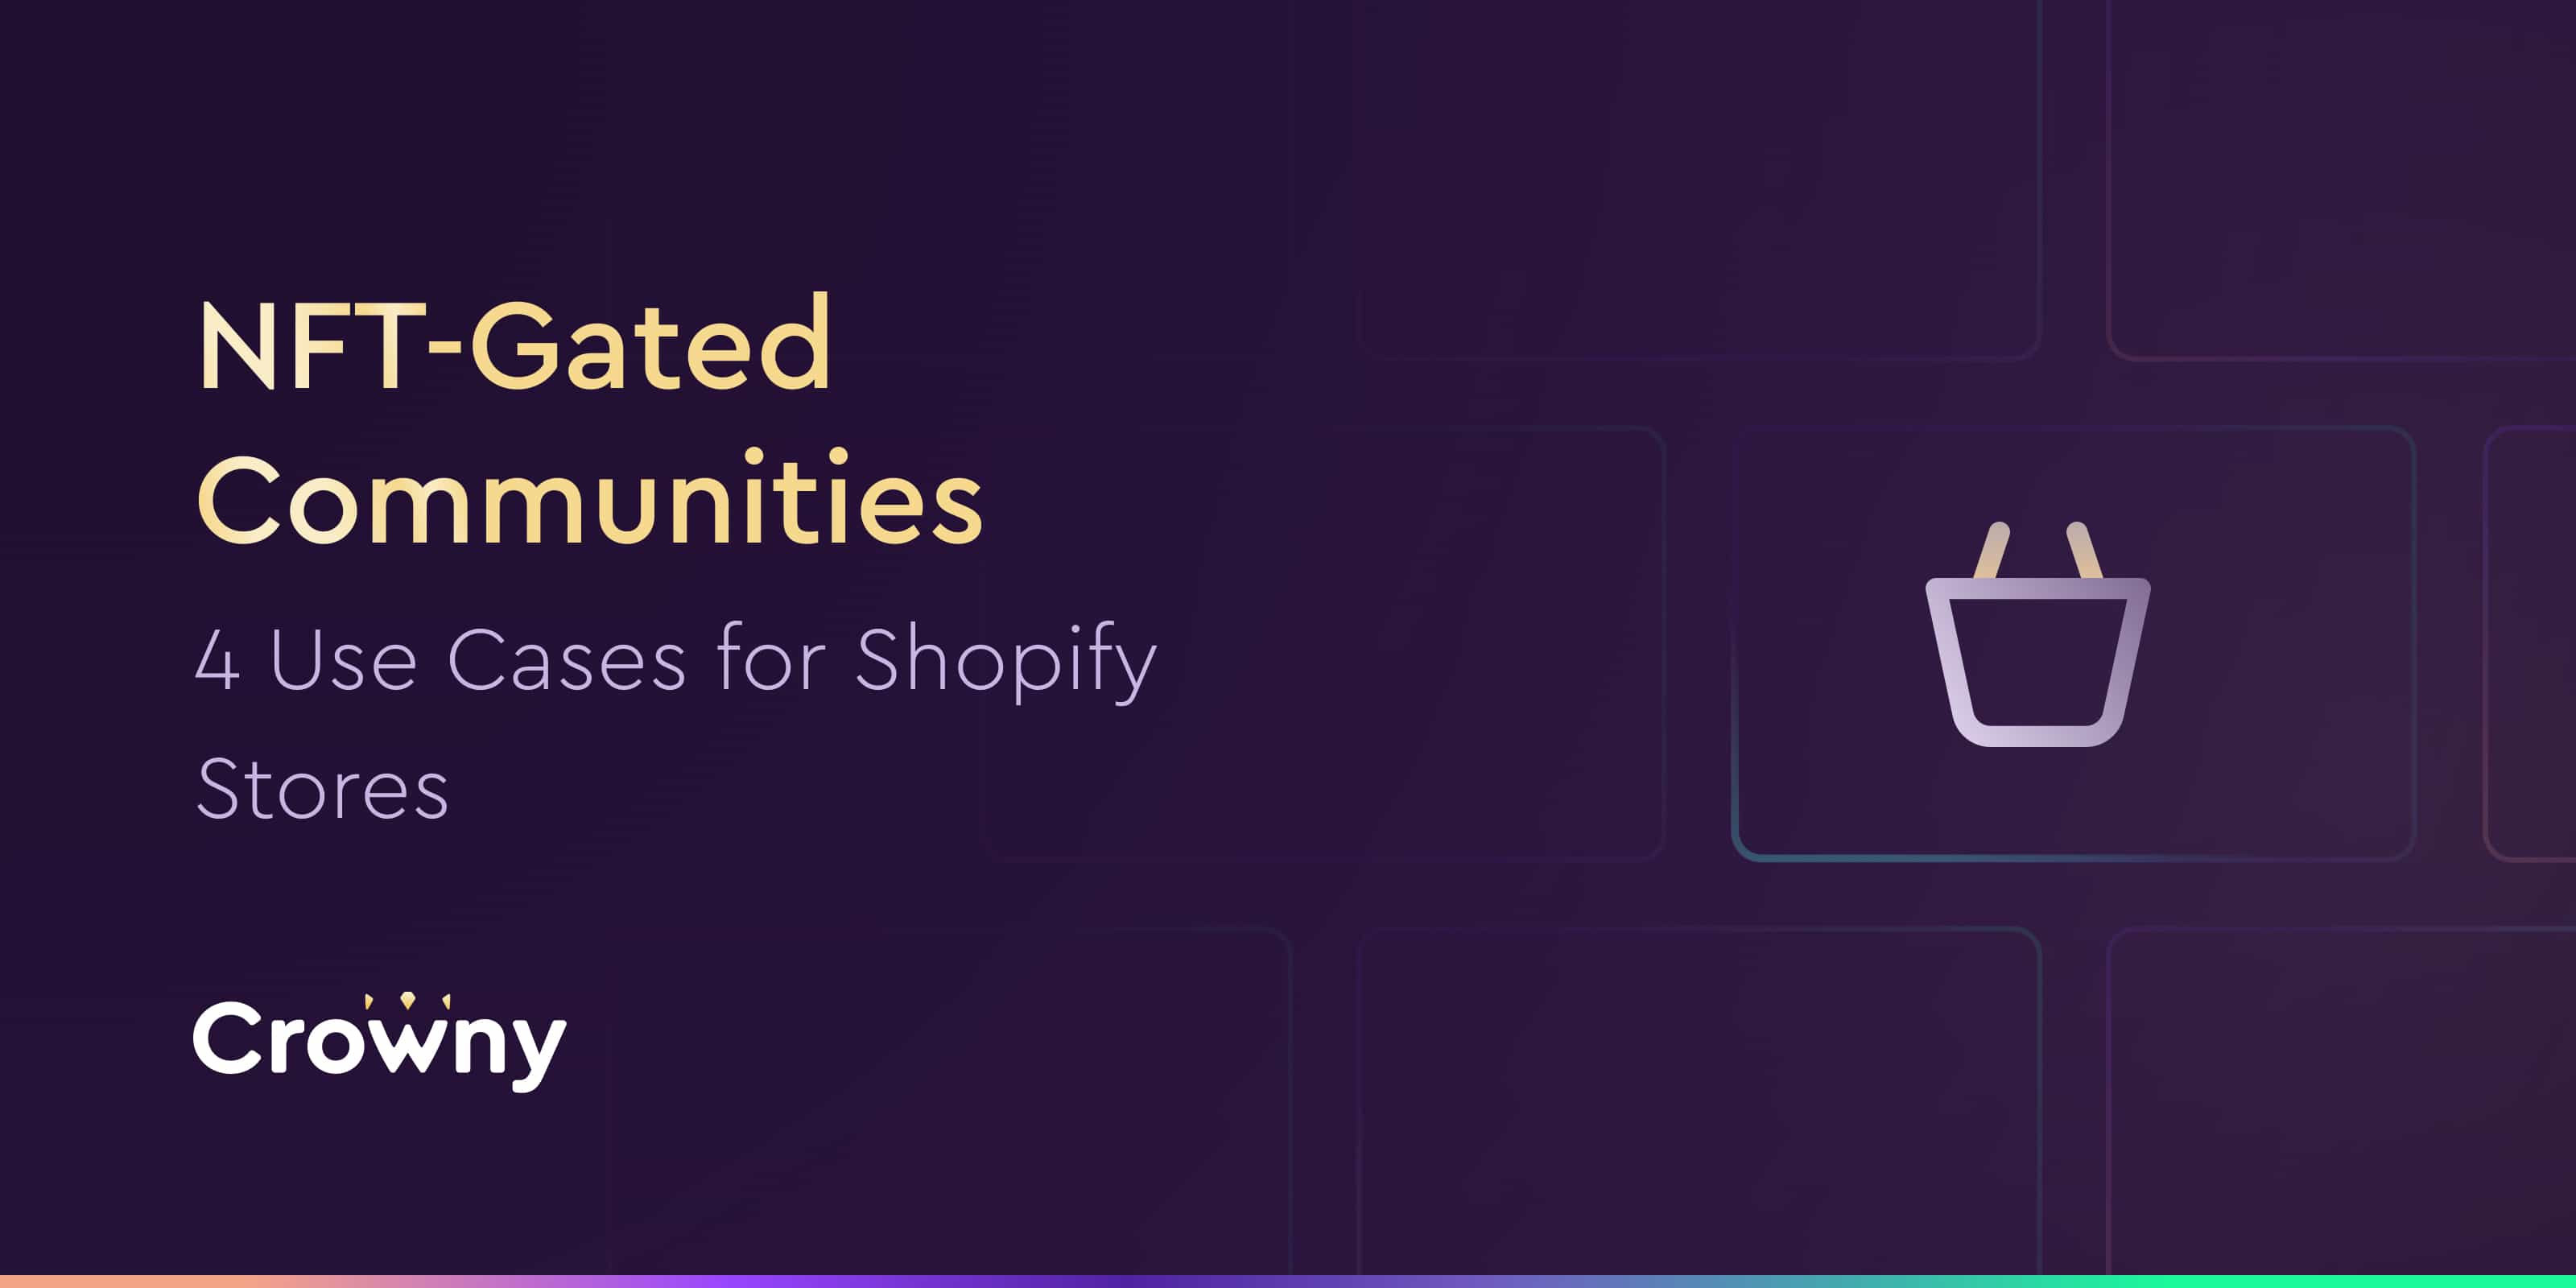 4 Use Cases of NFT-gated Communities for Shopify Stores